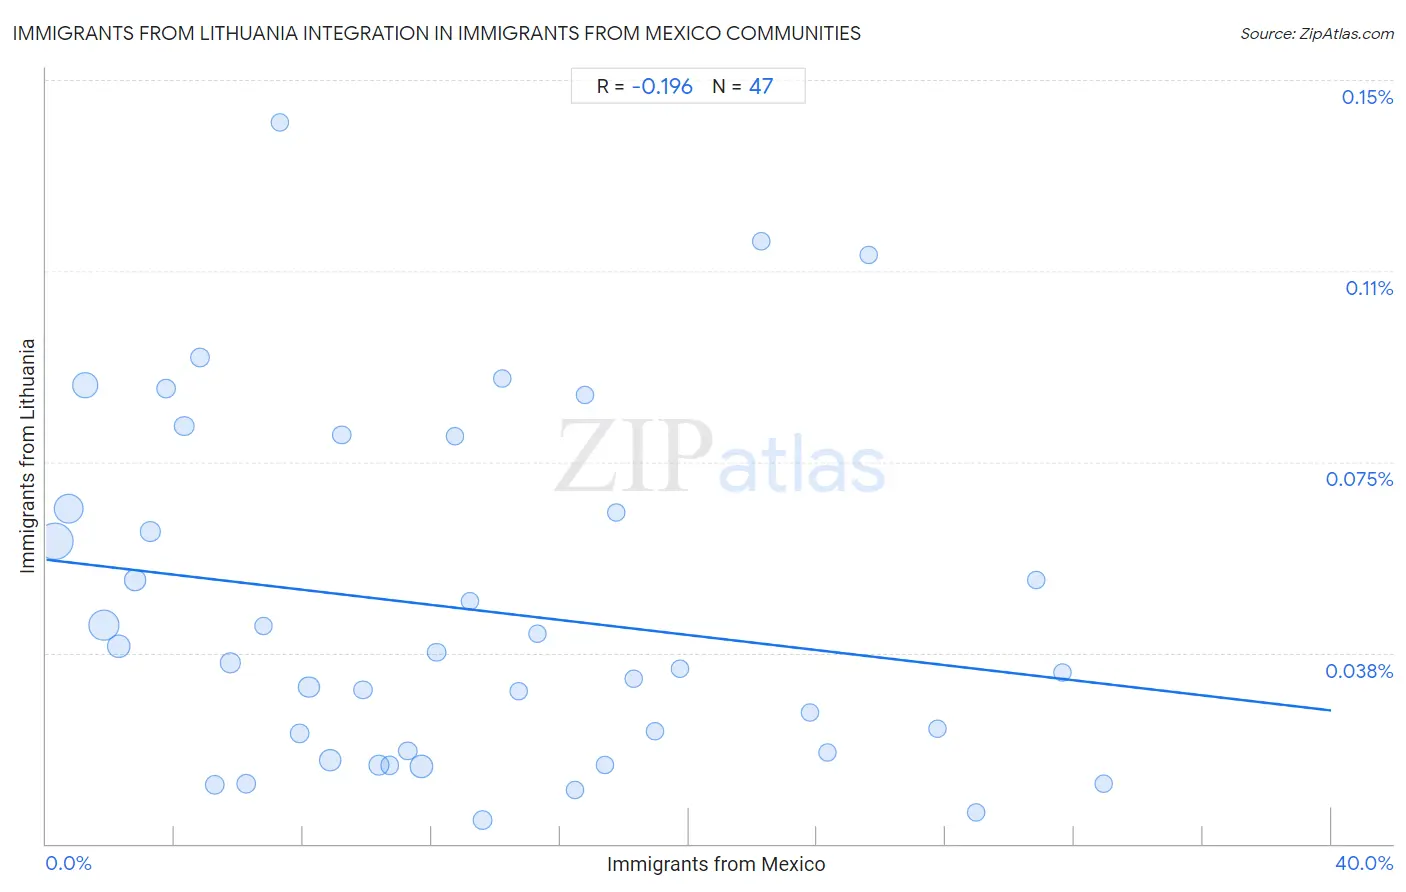 Immigrants from Mexico Integration in Immigrants from Lithuania Communities